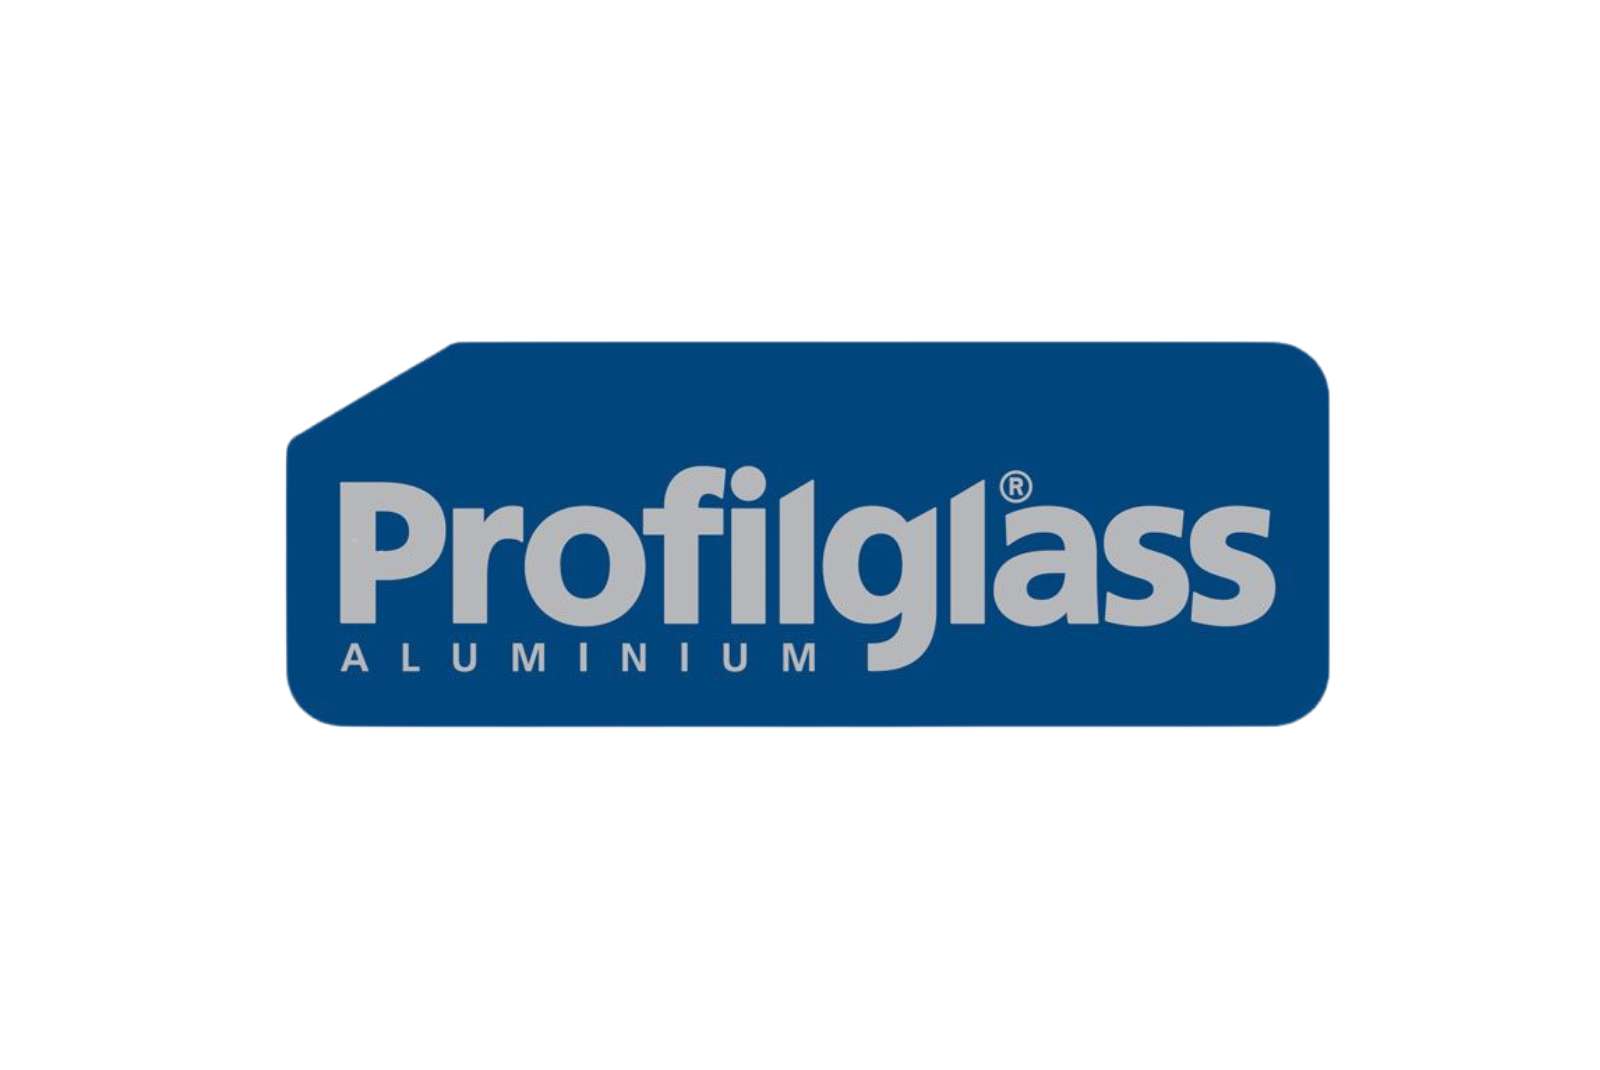 KNOW MORE ABOUT PROFILE GLASS ALUMINUM